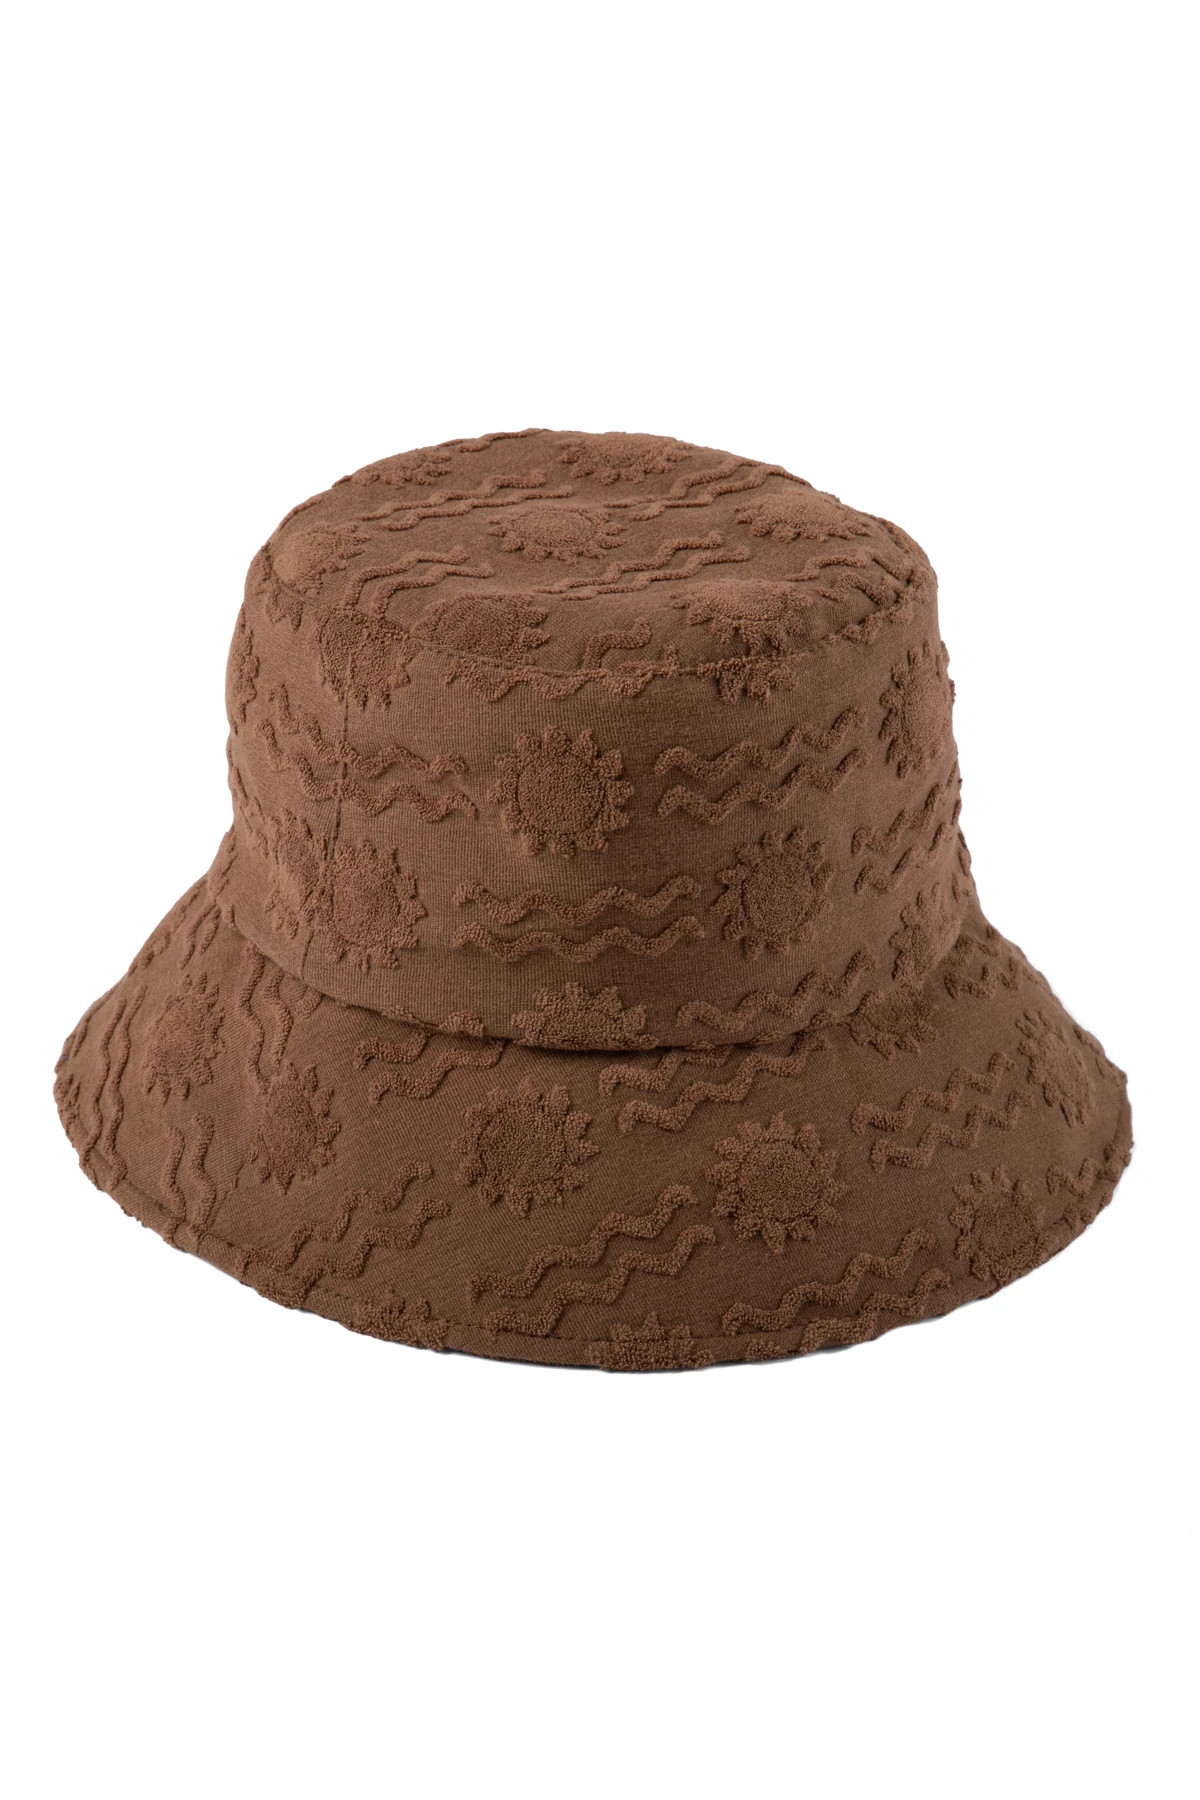 COCO Summer of Sun Wave Bucket Hat image number 2